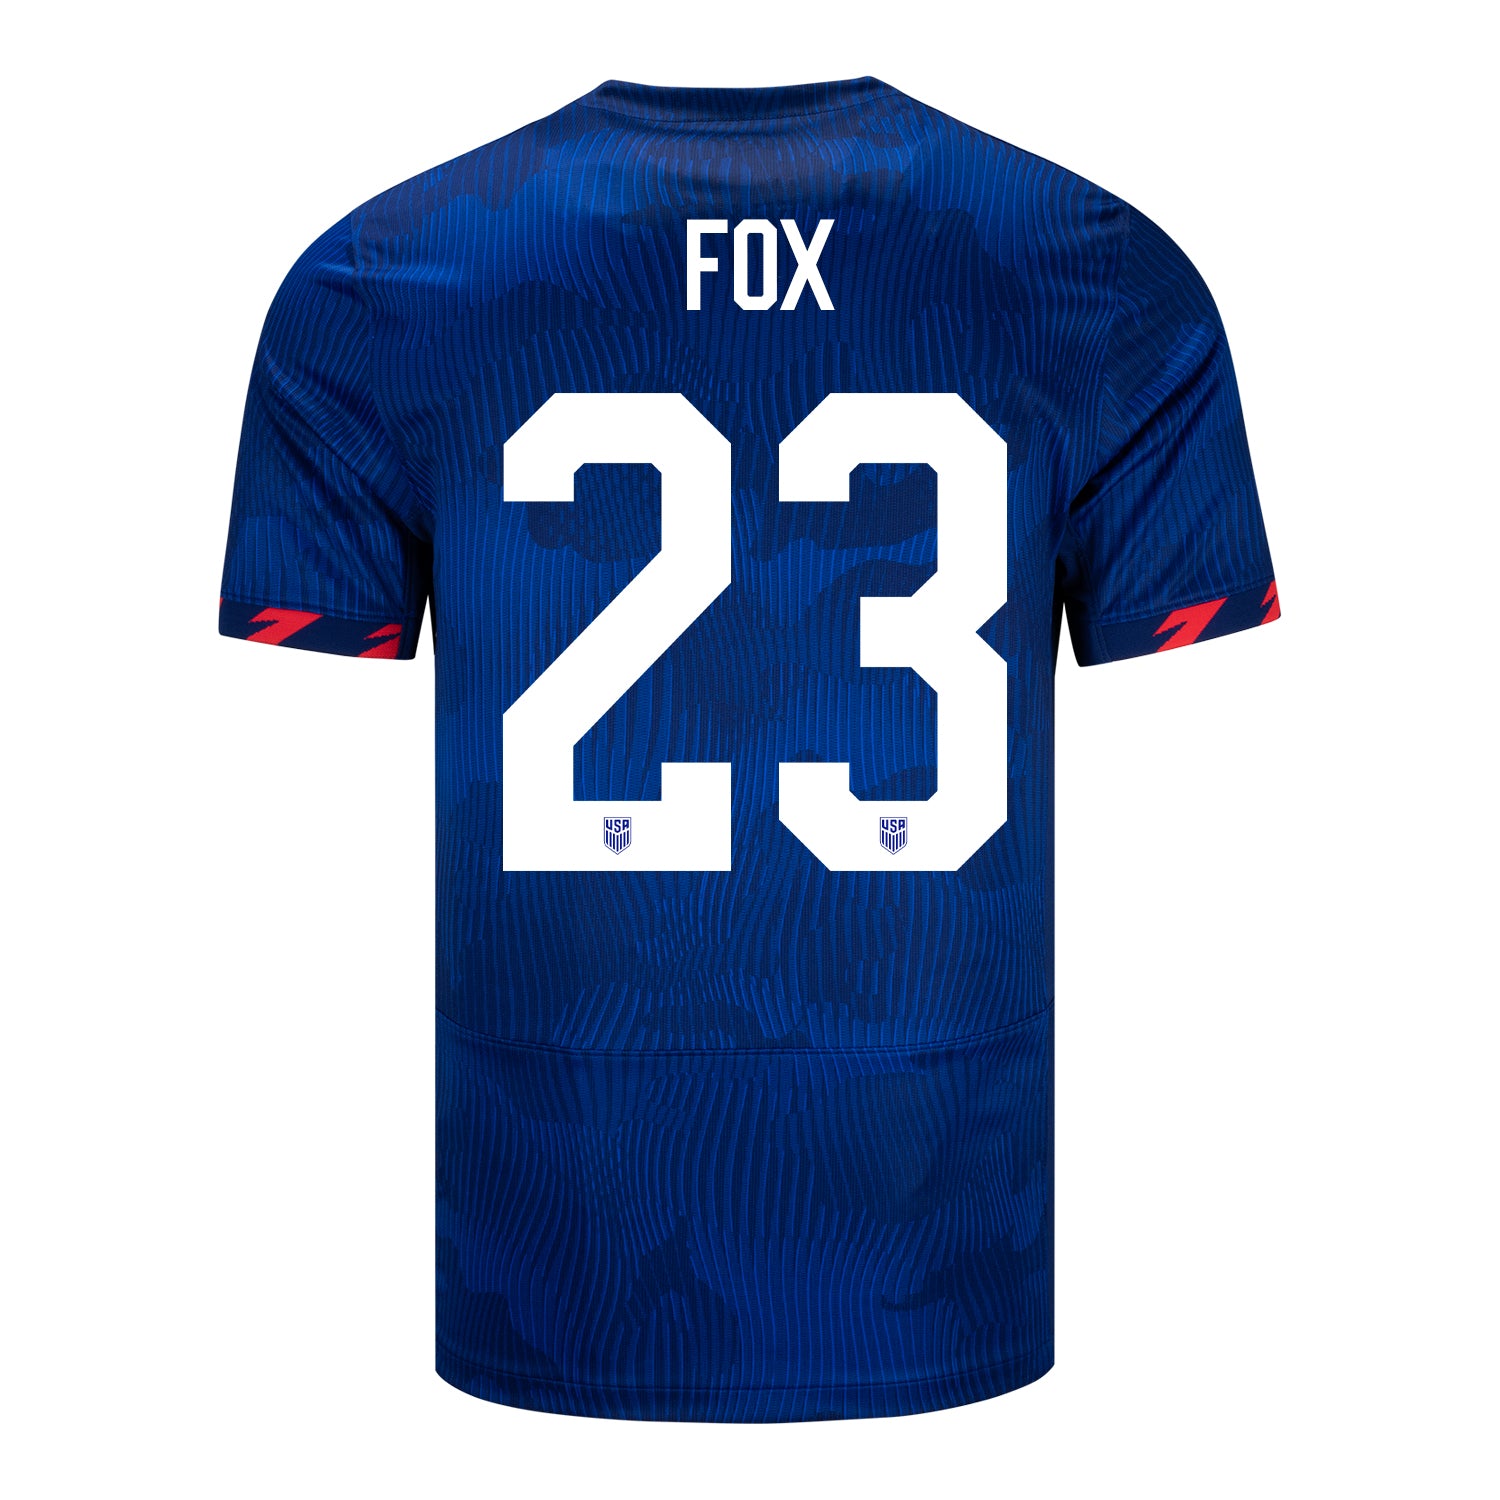 Men's Nike USWNT 2023 Away Personalized Match Jersey in Blue - Back View